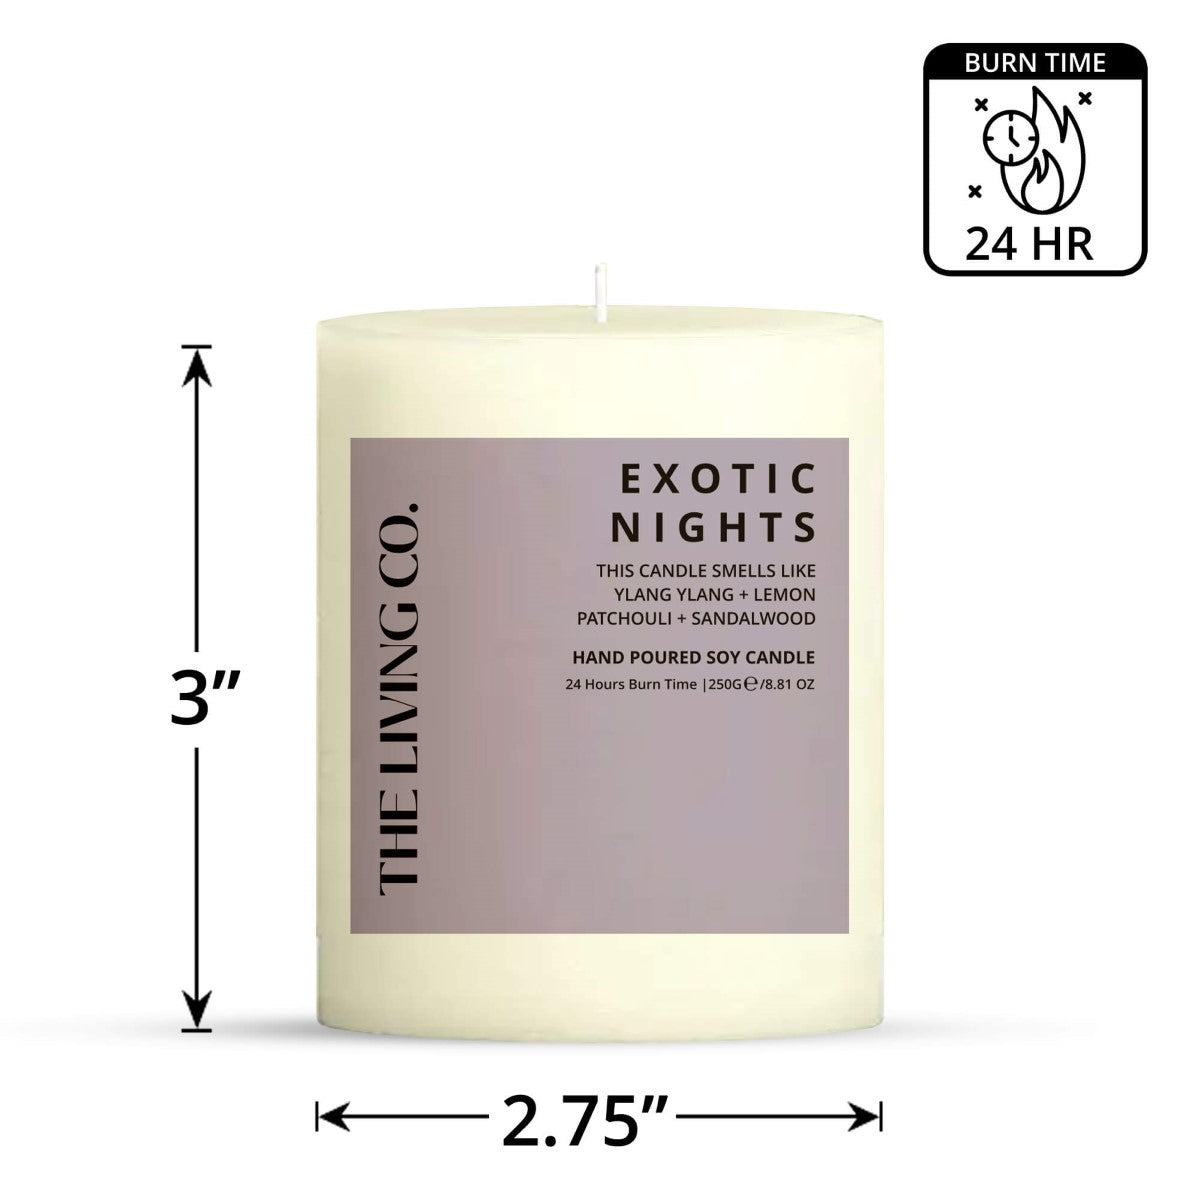 Exotic Nights Hand Poured Scented Candle